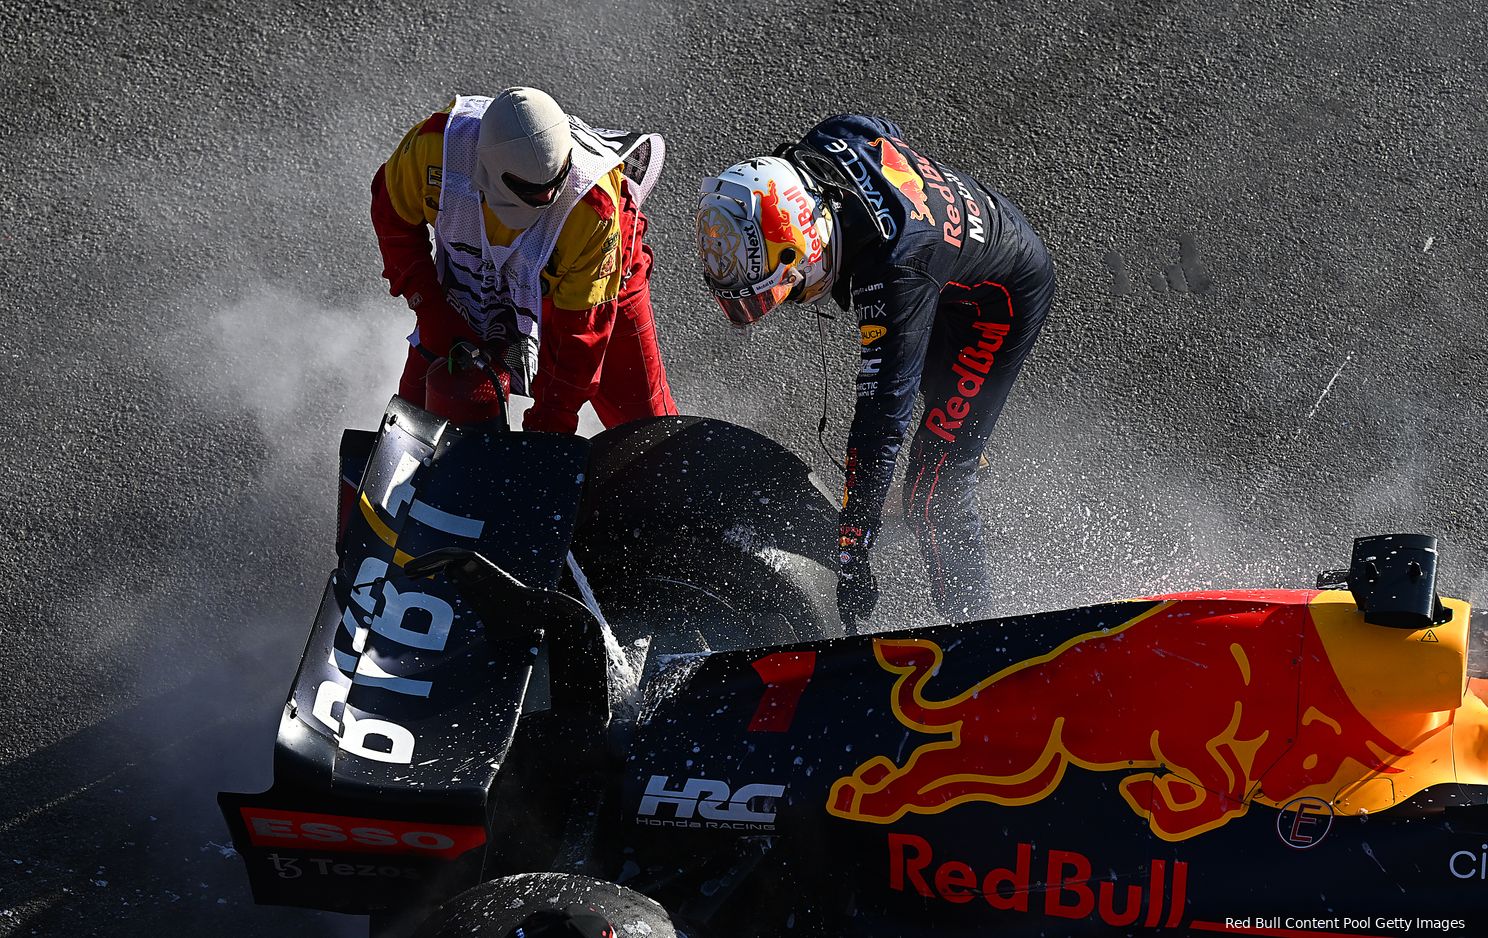 Max Verstappen spoke hopelessly about the situation at Red Bull Racing after the DNFs in the first three races.  In this photo the Marshal helps while his car, for the last time that year, had to be extinguished.  (Photo: Red Bull Content Pool/Getty Images)